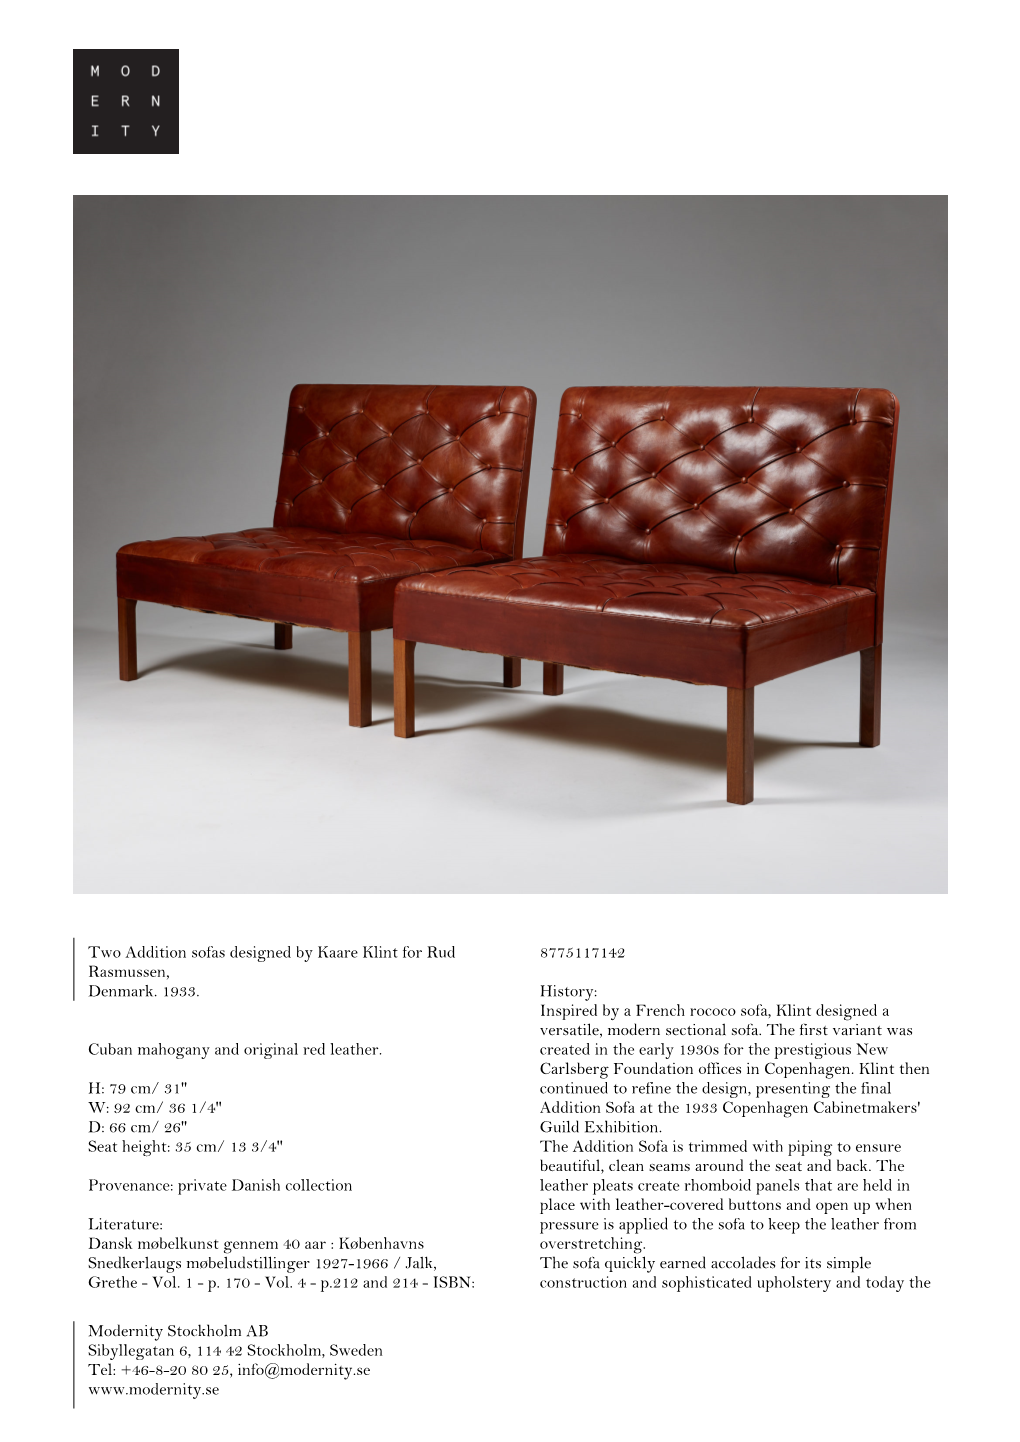 Two Addition Sofas Designed by Kaare Klint for Rud Rasmussen, Denmark. 1933. Cuban Mahogany and Original Red Leather. H